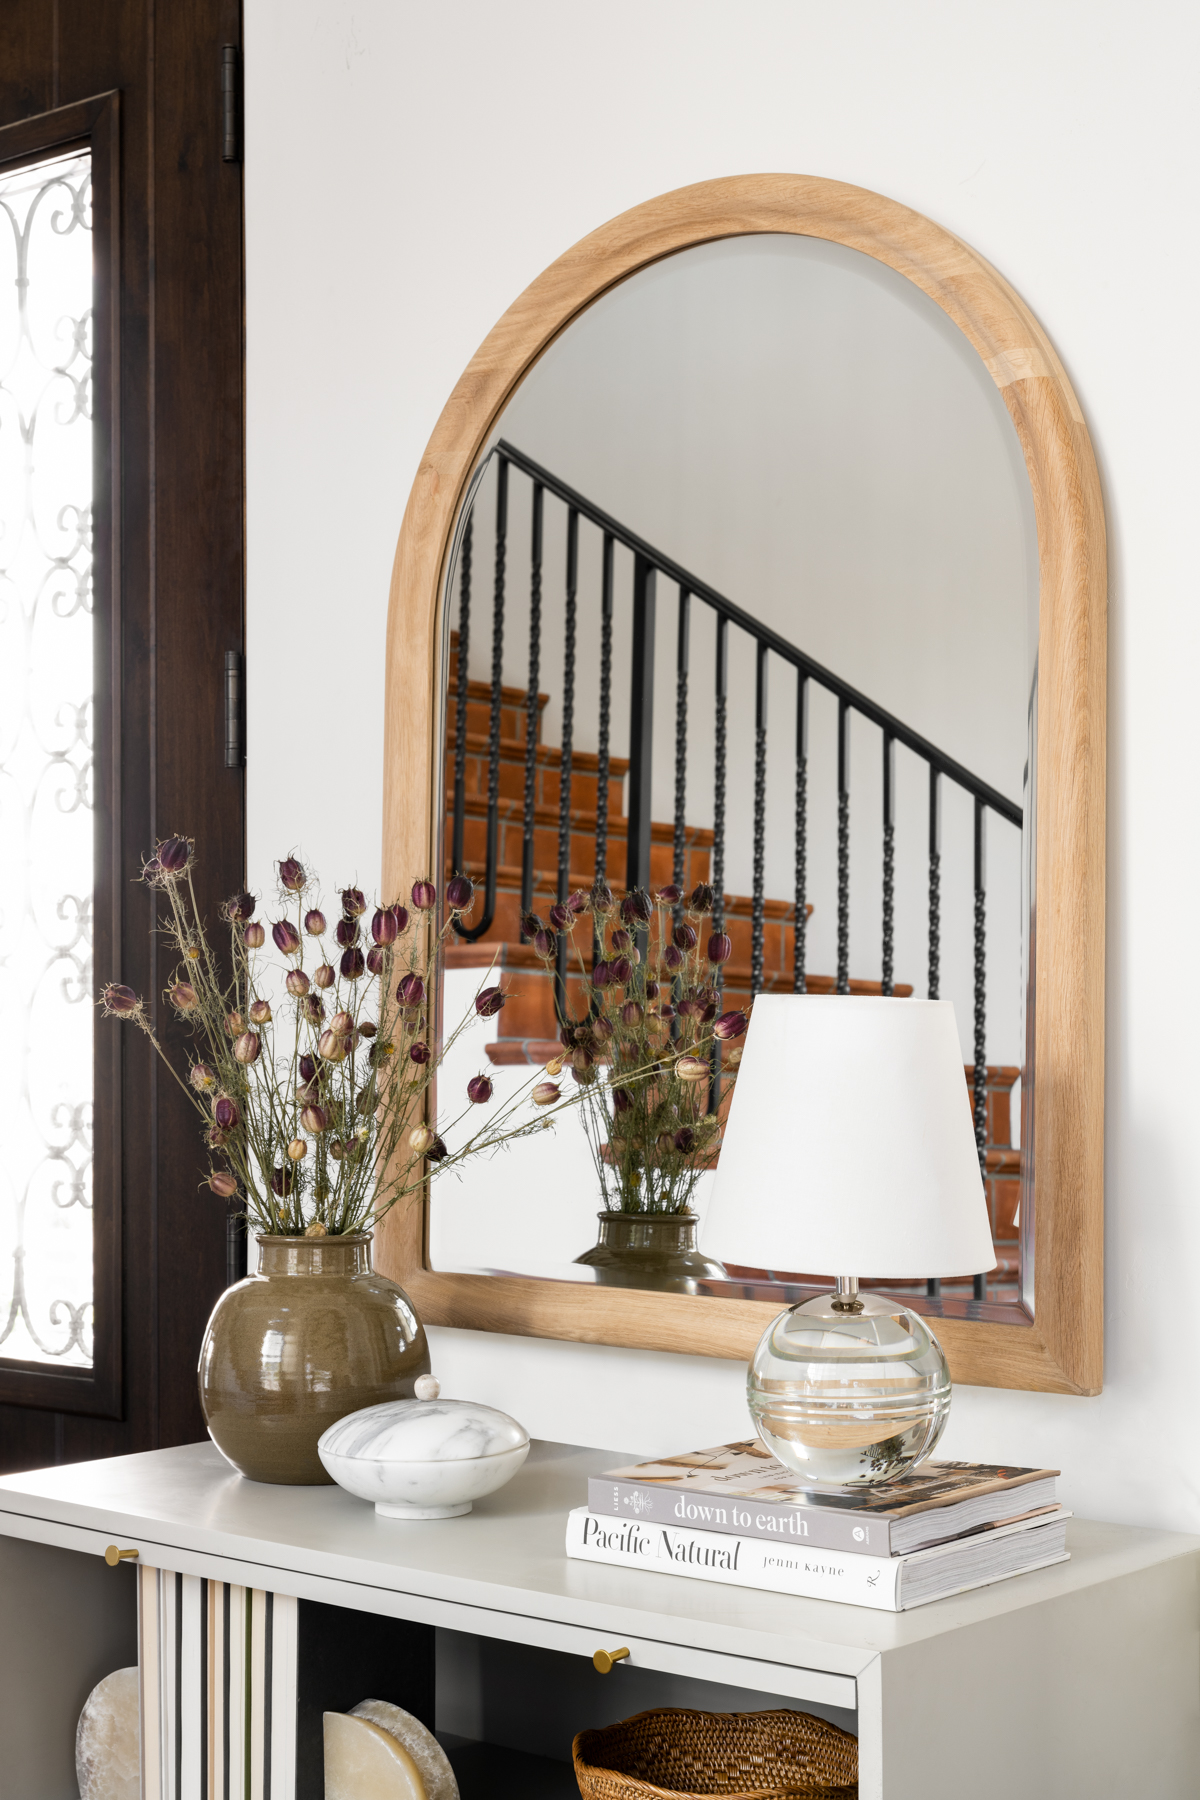 console table with small green vase in front of arched mirror